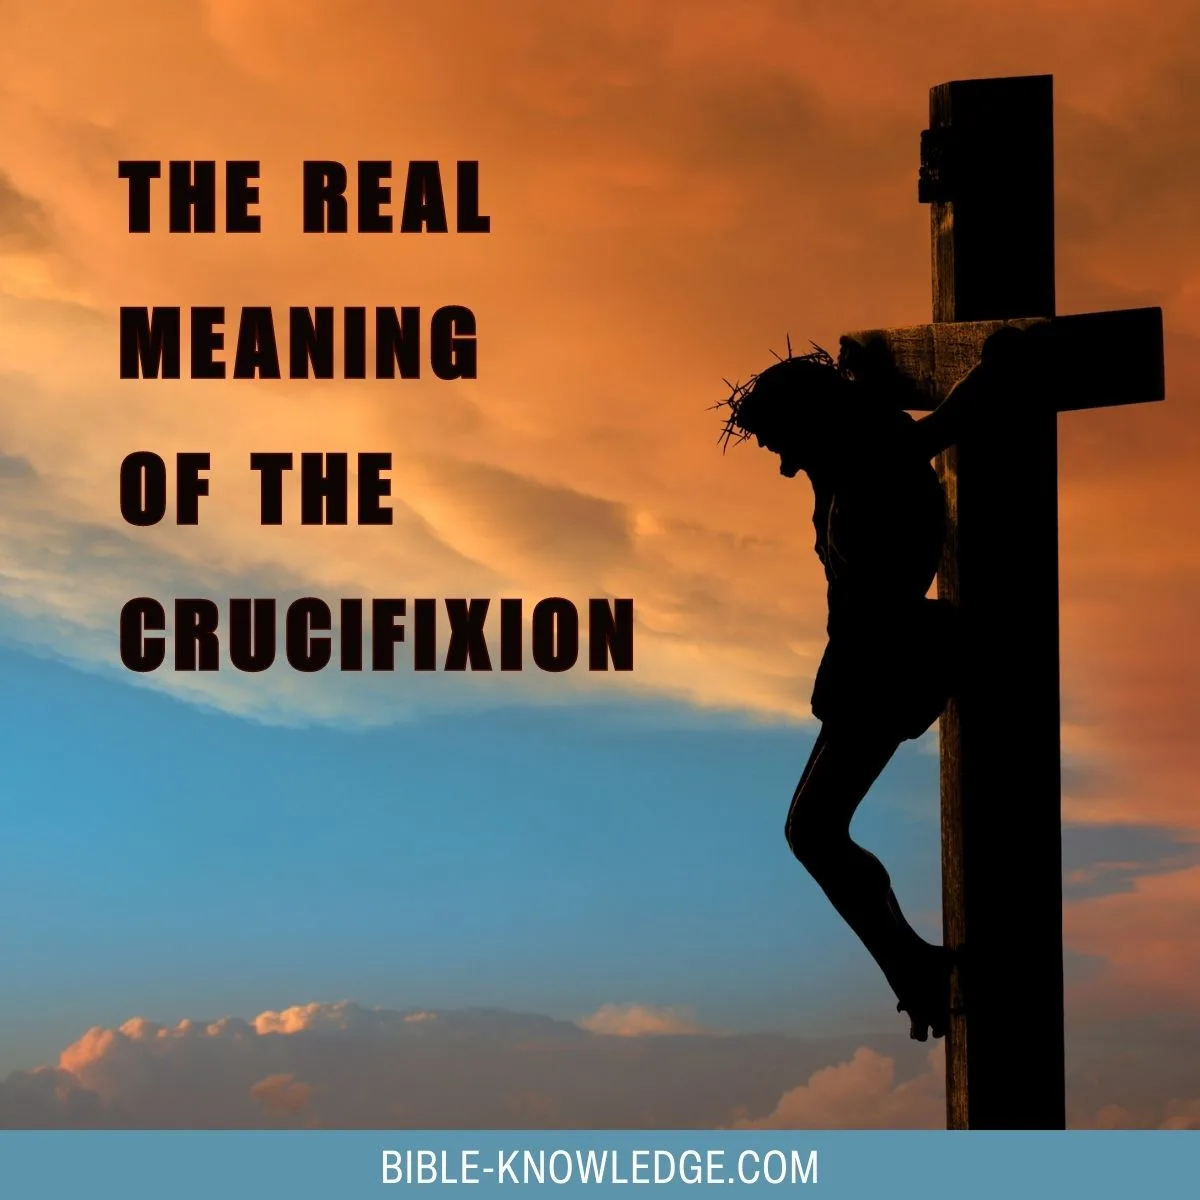 The Real Meaning of the Crucifixion